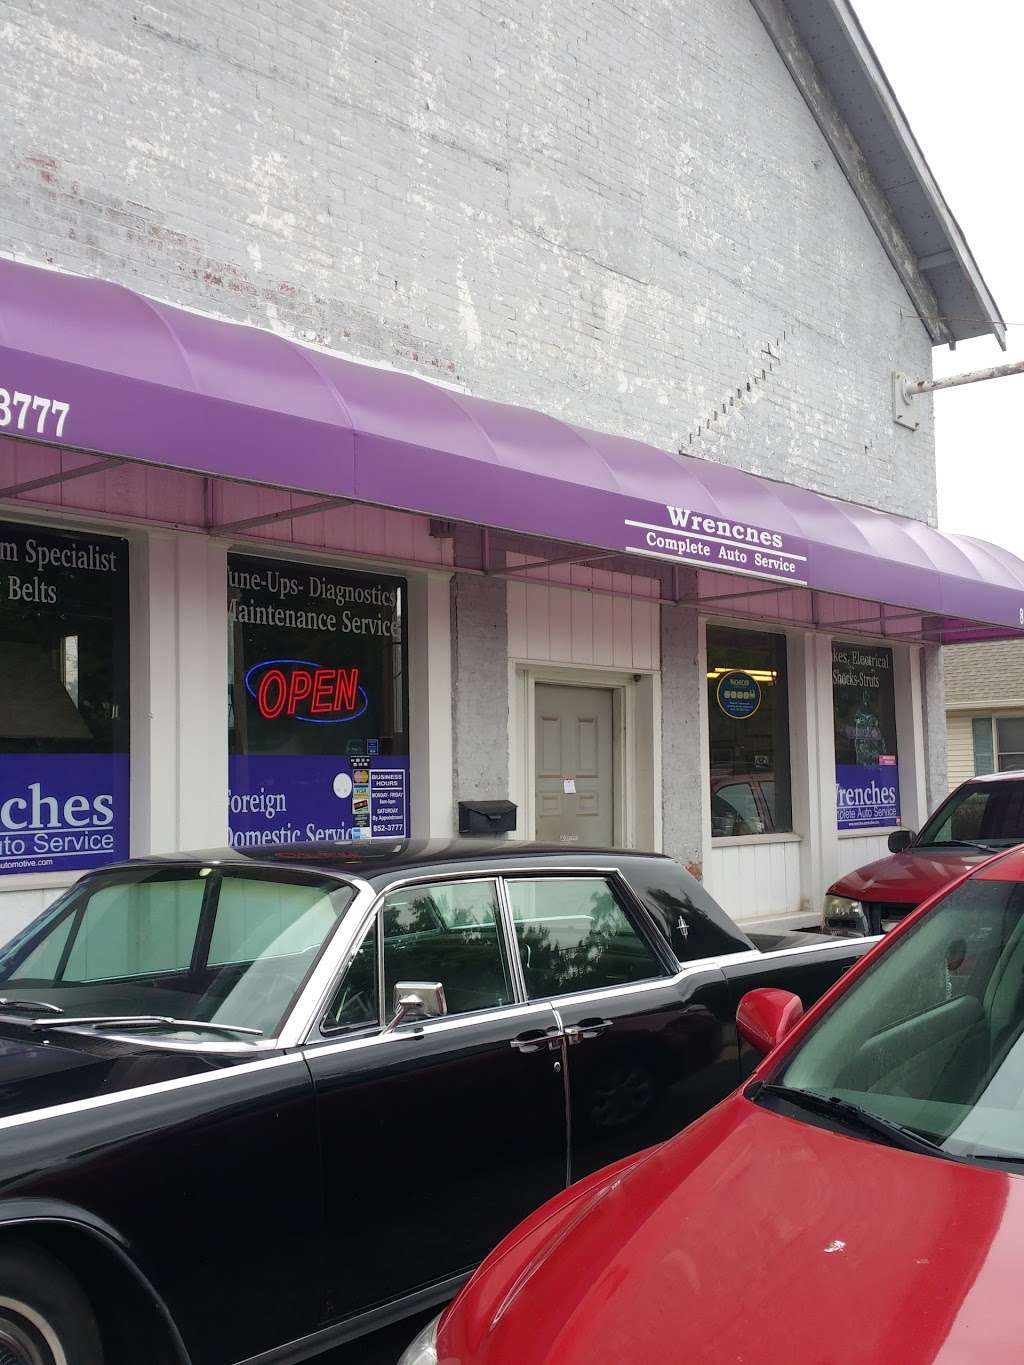 Wrenches Automotive | 303 E Main St, Brownsburg, IN 46112 | Phone: (317) 852-3777